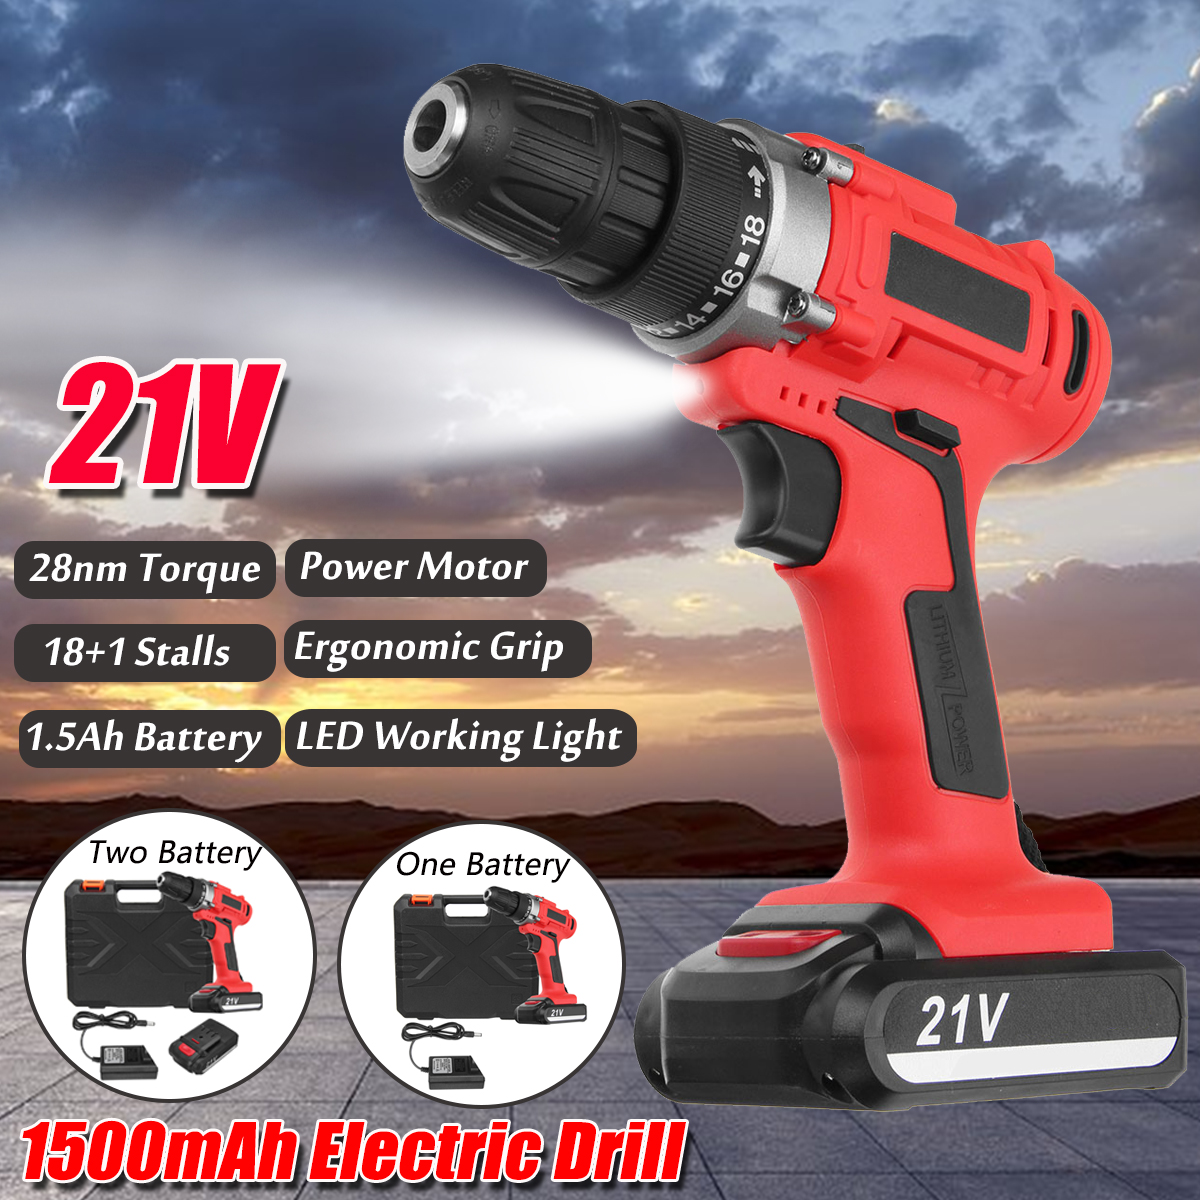 300W-21V-LED-Cordless-Electric-Drill-Screwdriver-1500mAh-Rechargeable-Li-Ion-Battery-Repair-Tools-1421882-1